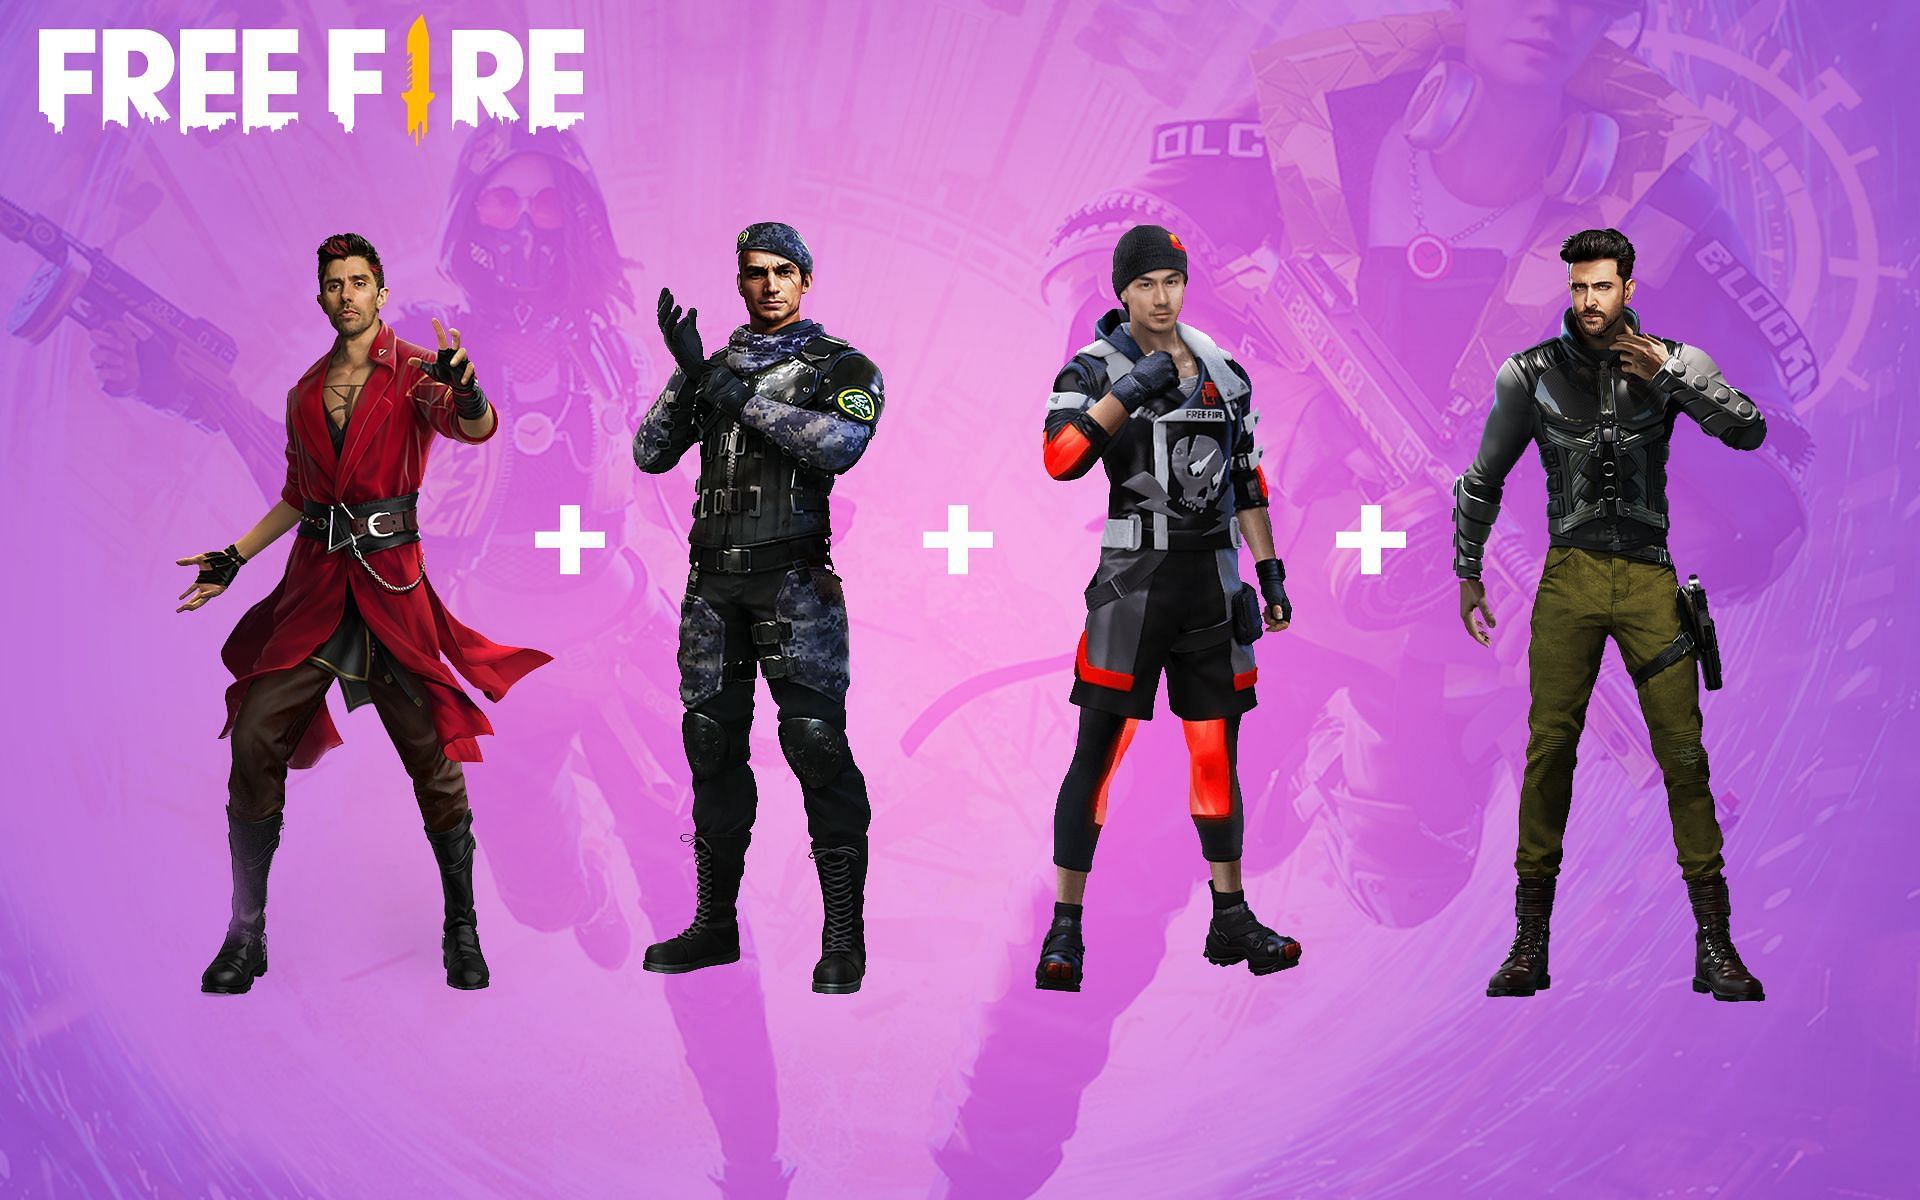 Character combinations are a unique aspect of Free Fire (Image via Sportskeeda)